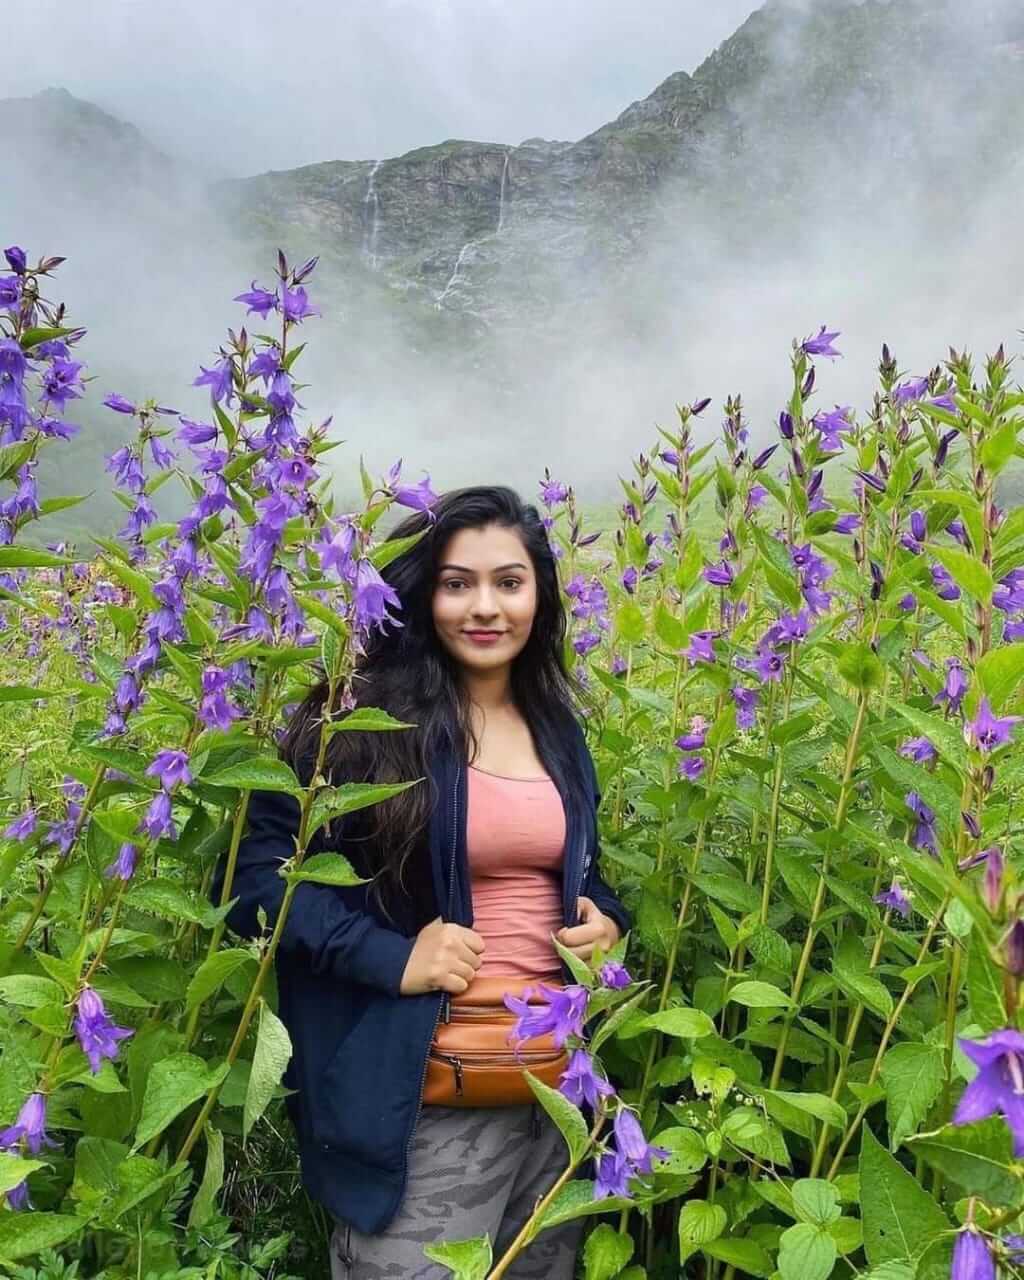 <span  class="uc_style_uc_tiles_grid_image_elementor_uc_items_attribute_title" style="color:#ffffff;">Valley of Flowers- dreamgohimalayas.in</span>